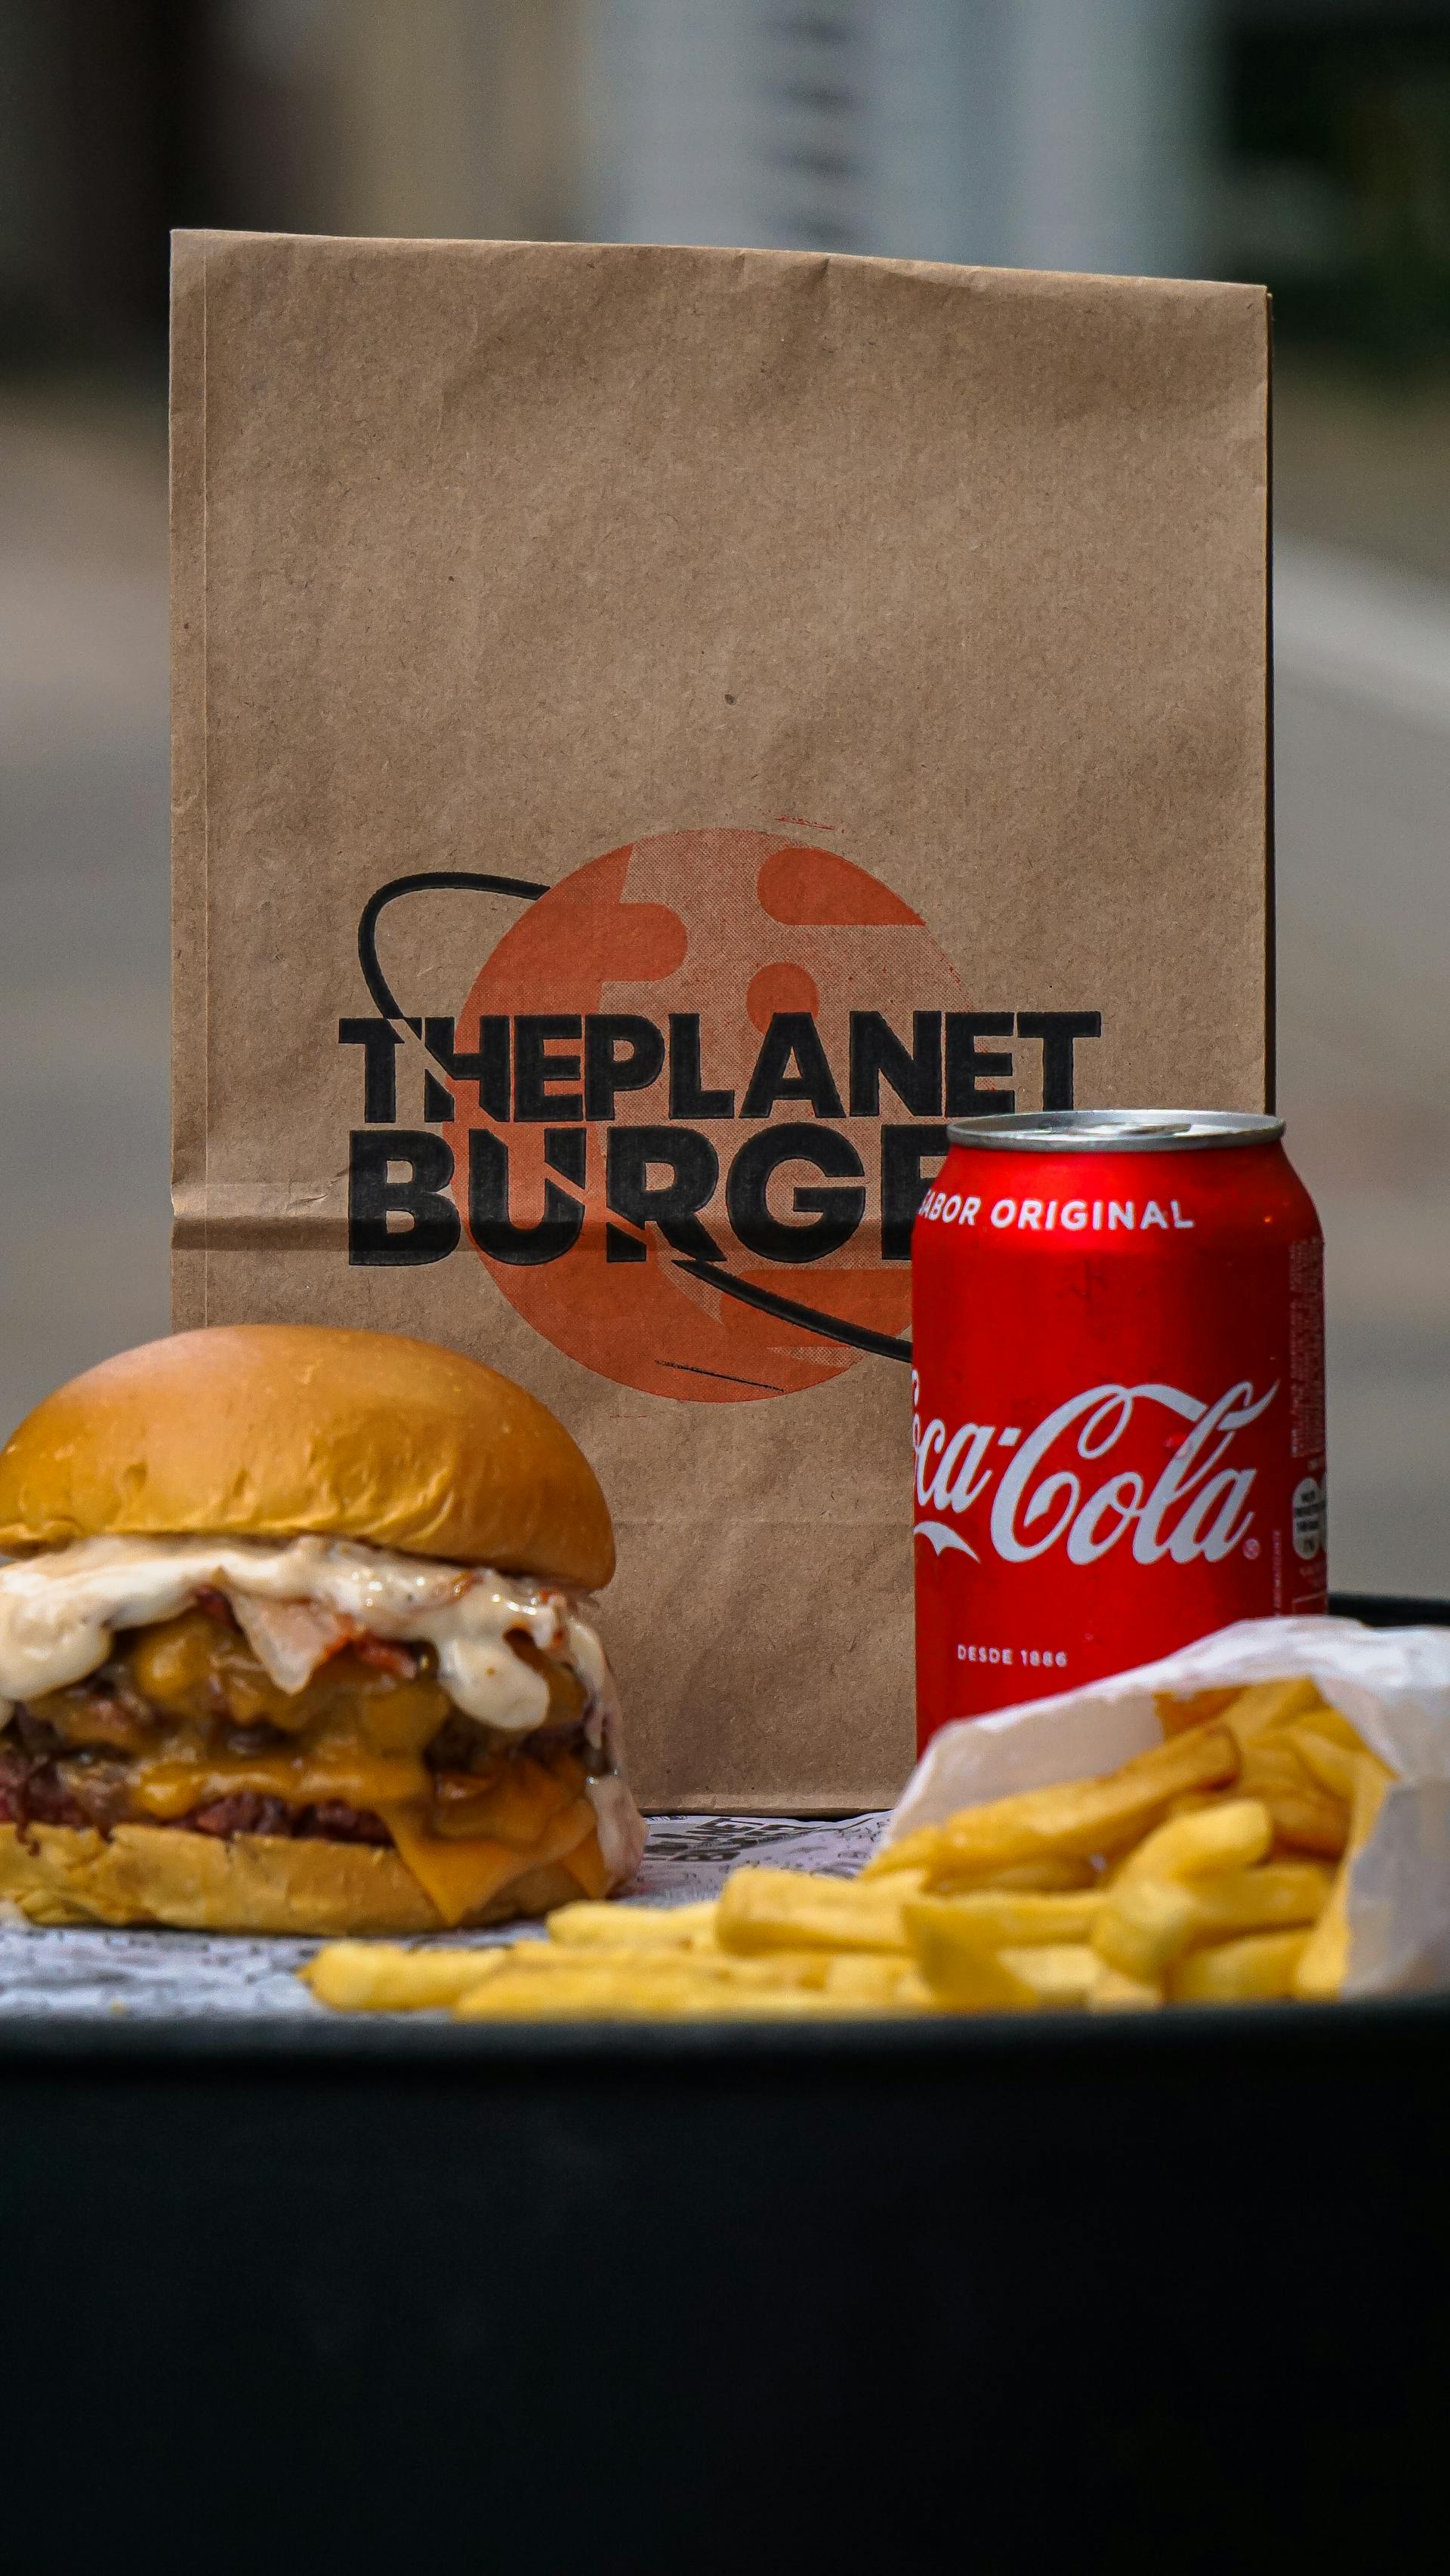 A burger, fries, and a soda can lying next to a paper bag | Source: Pexels